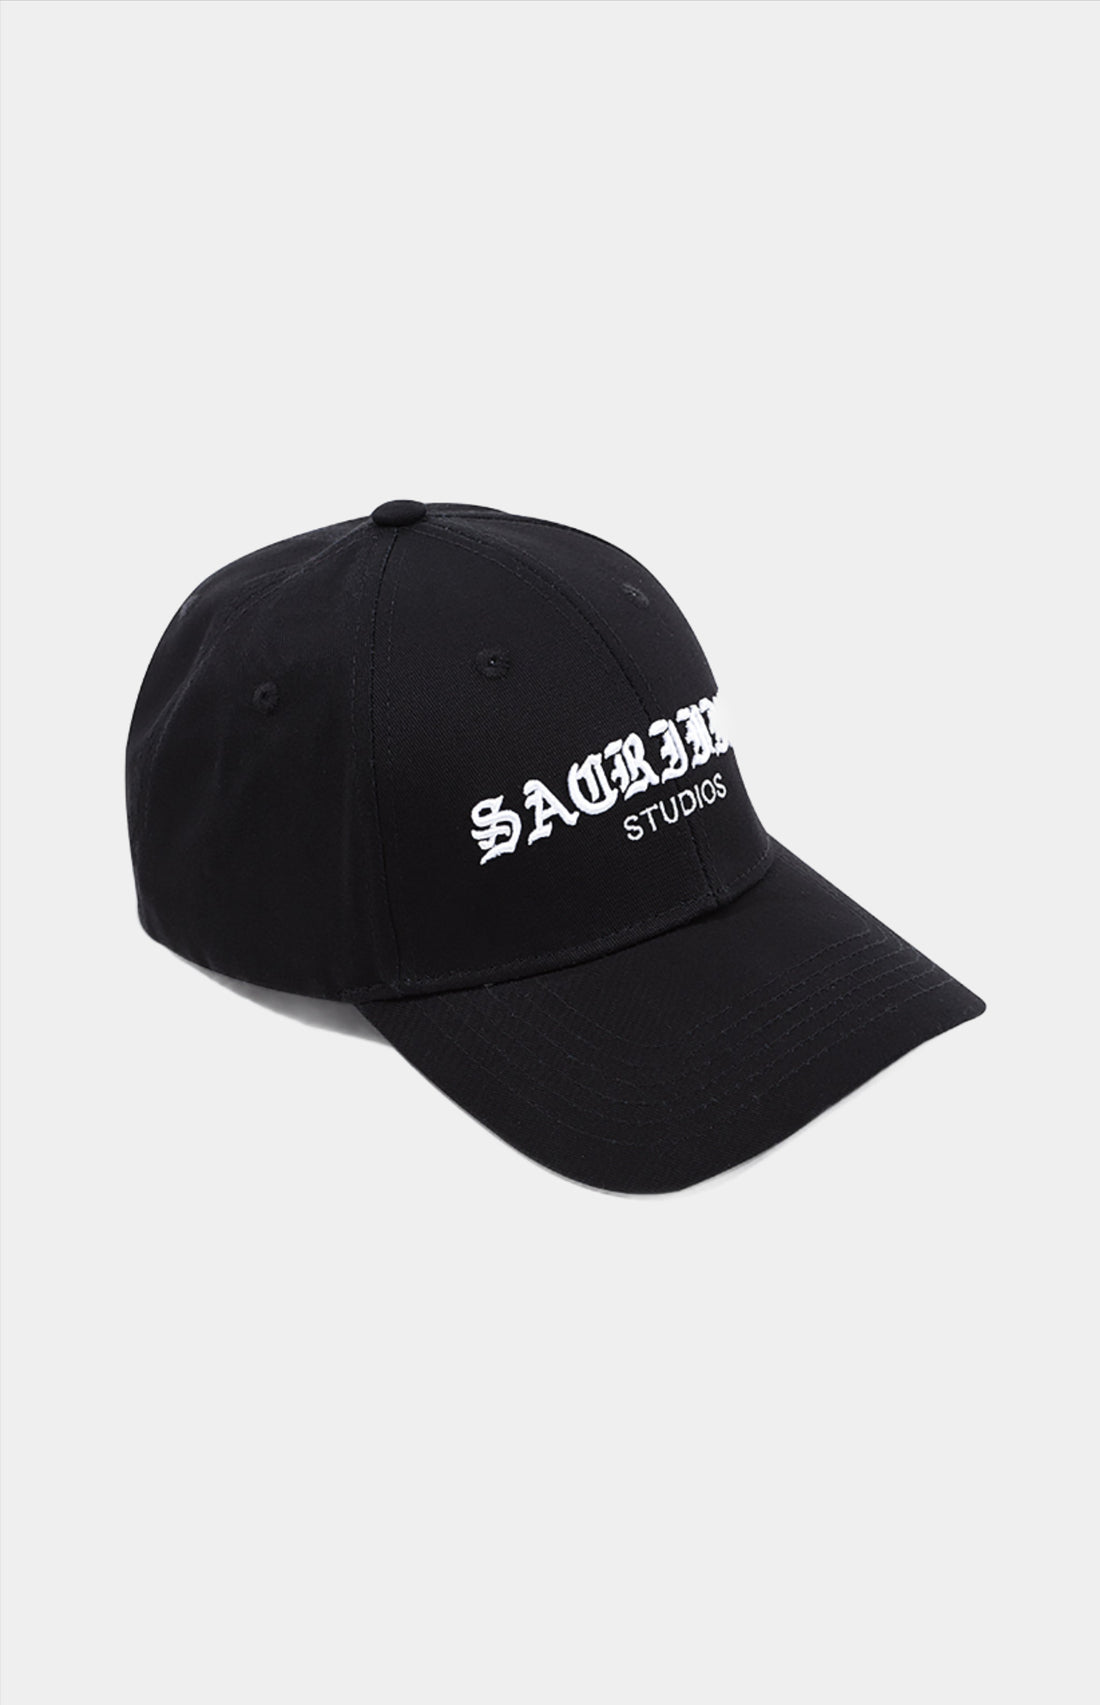 Upgrade Your Style Game with Our Sophisticated Black Baseball Cap - Expertly Crafted in Portugal with Bold White Stitching and High-Quality Materials for Durability and Longevity. Easy to Care for, Simply Machine Wash and Hang to Dry. A Must-Have Fashion Accessory for Any Stylish and Discerning Individual.